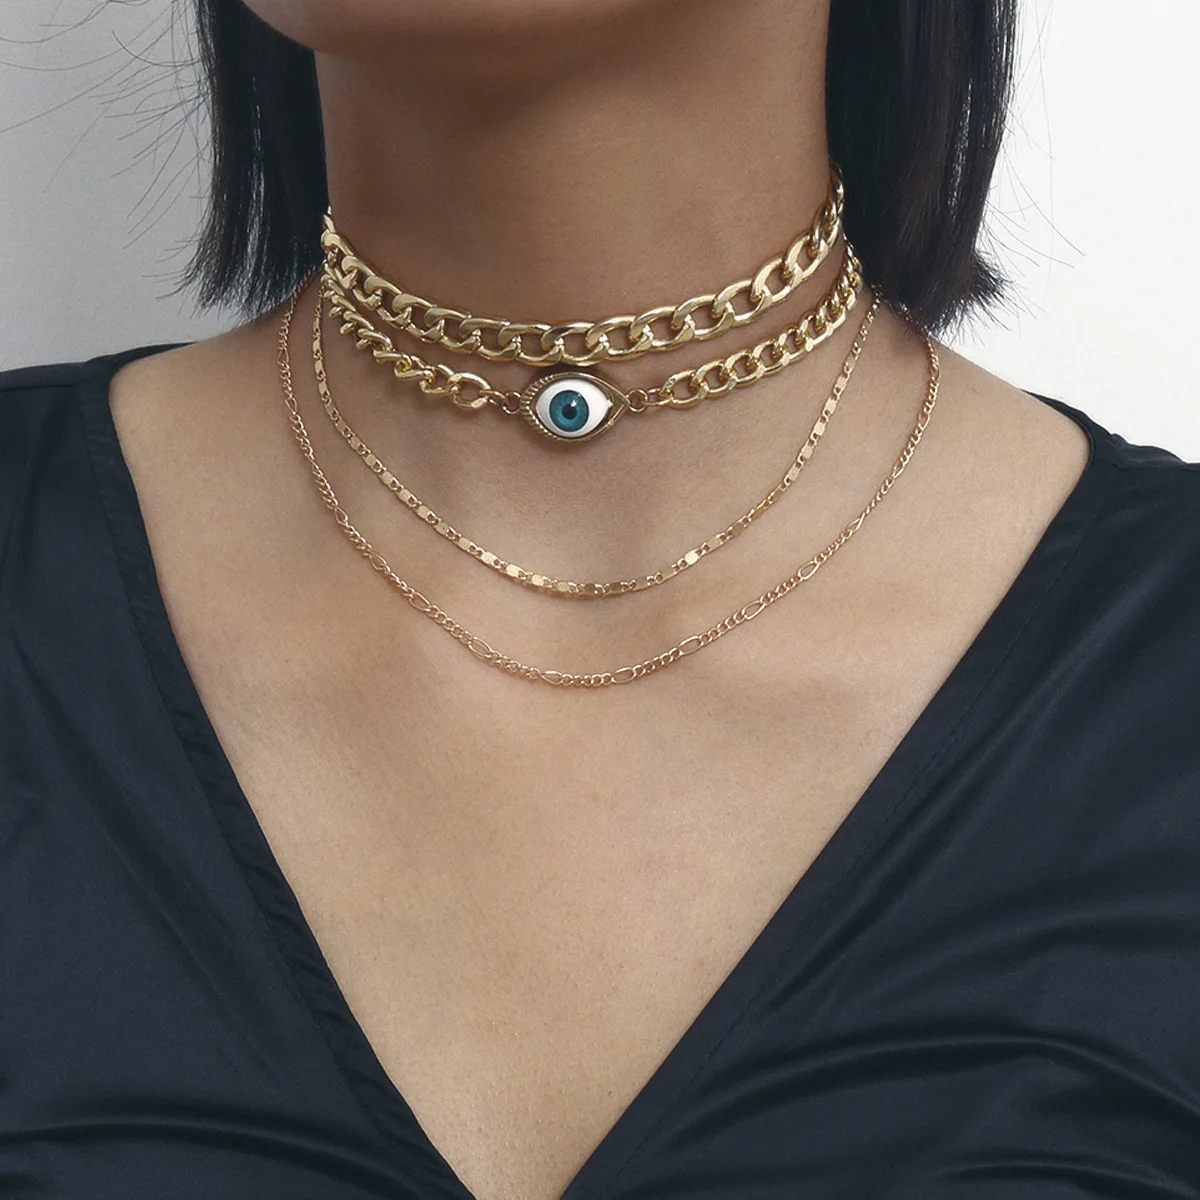 simplicity OT buckle pearl chokers necklace for women,custom lady multilayer charm snake chain necklace